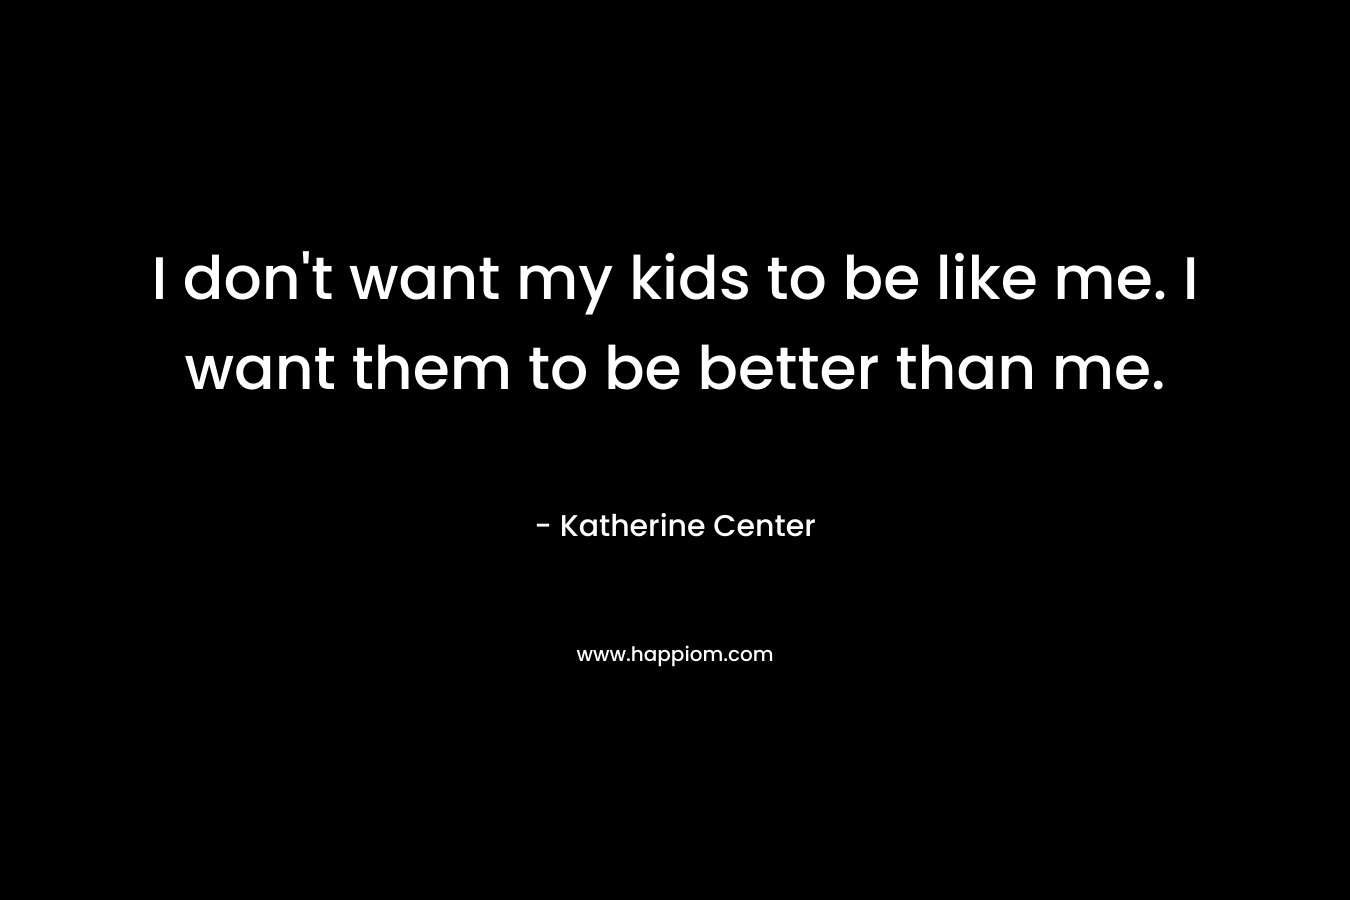 I don't want my kids to be like me. I want them to be better than me.